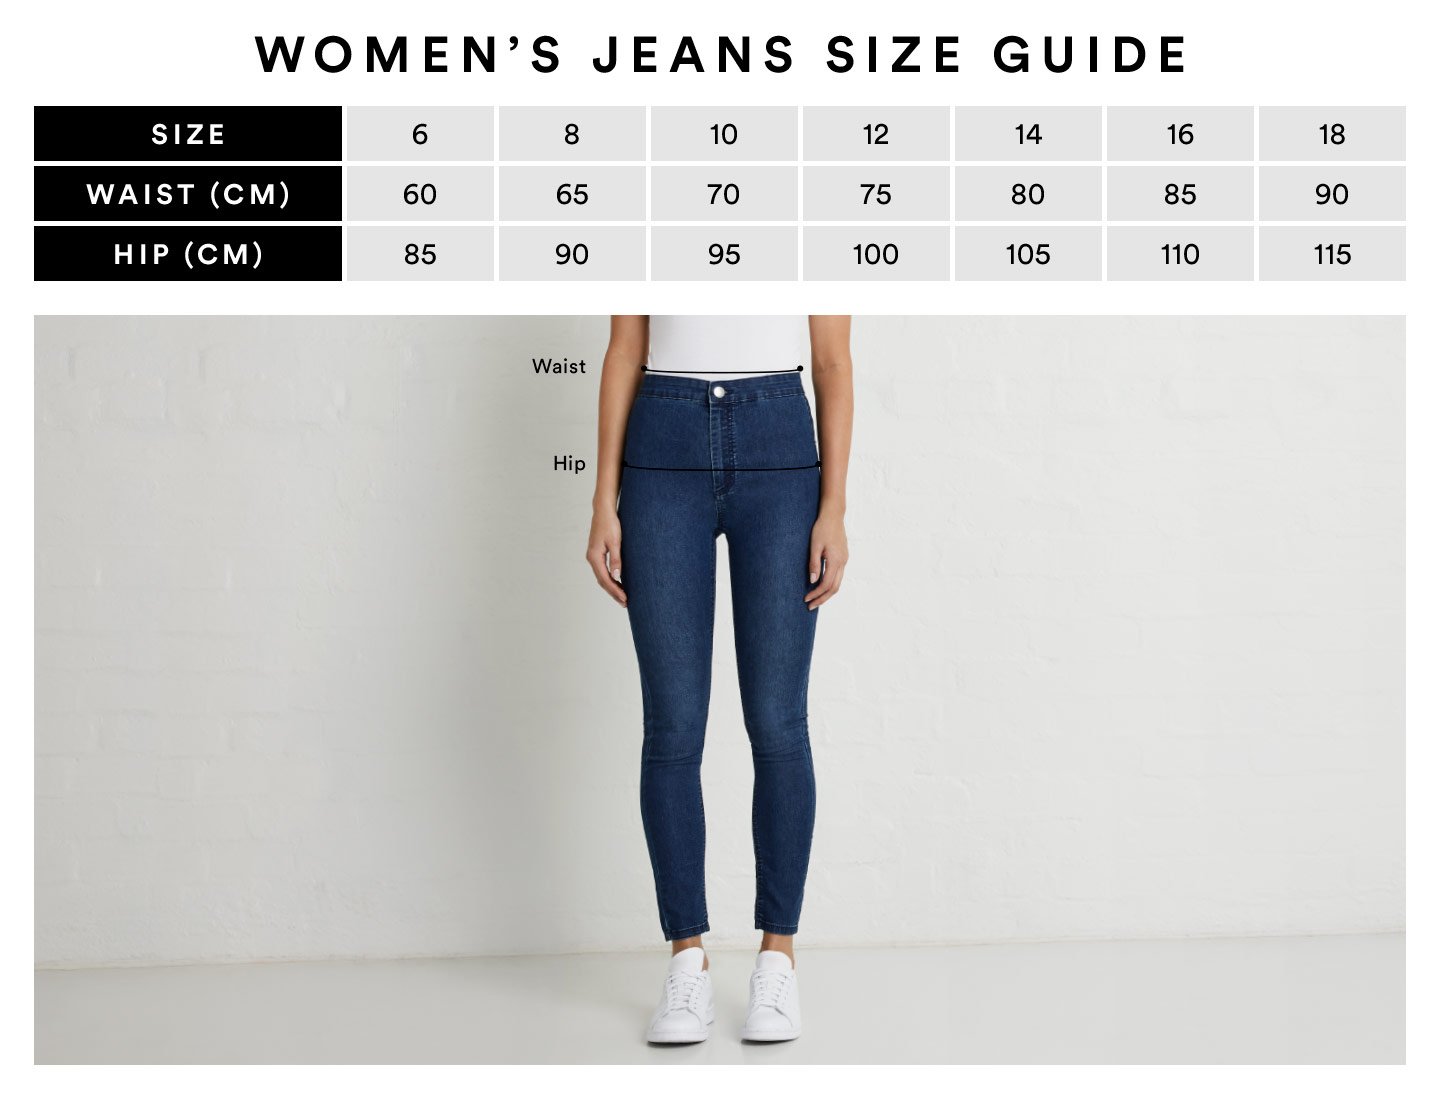 waist size for size 6 jeans